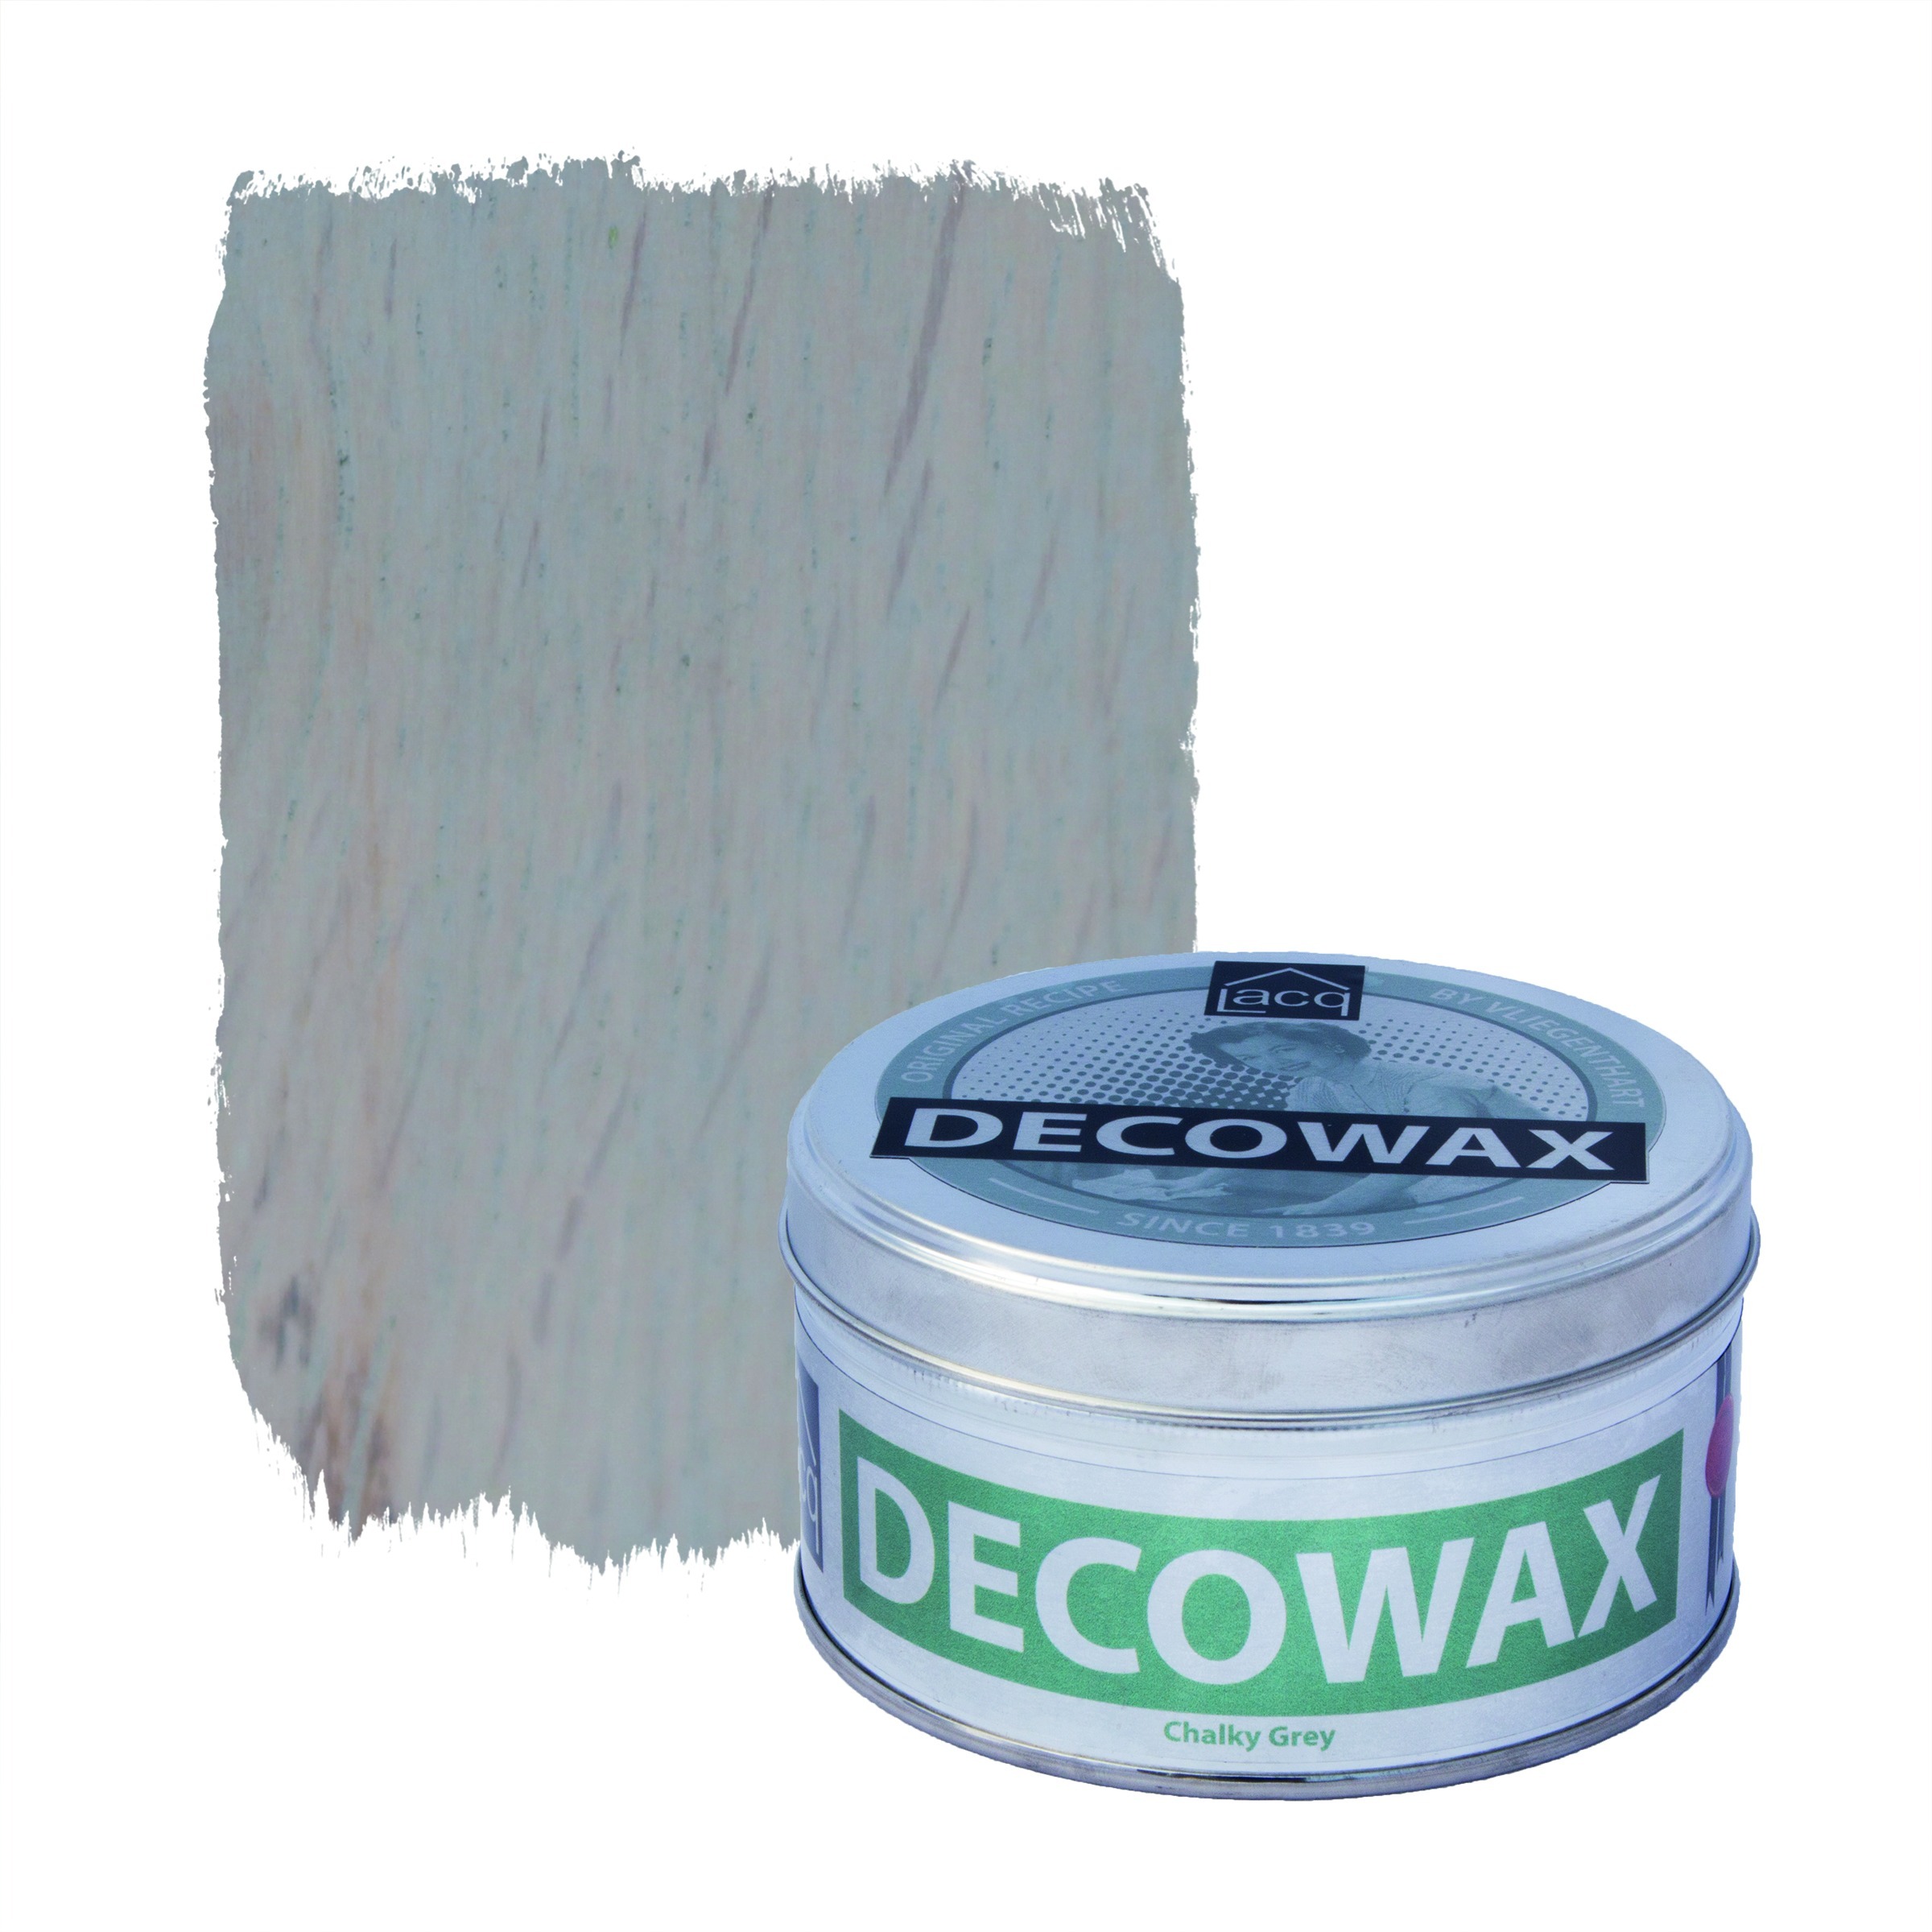 Lacq Decowax chalky grey 370 ml